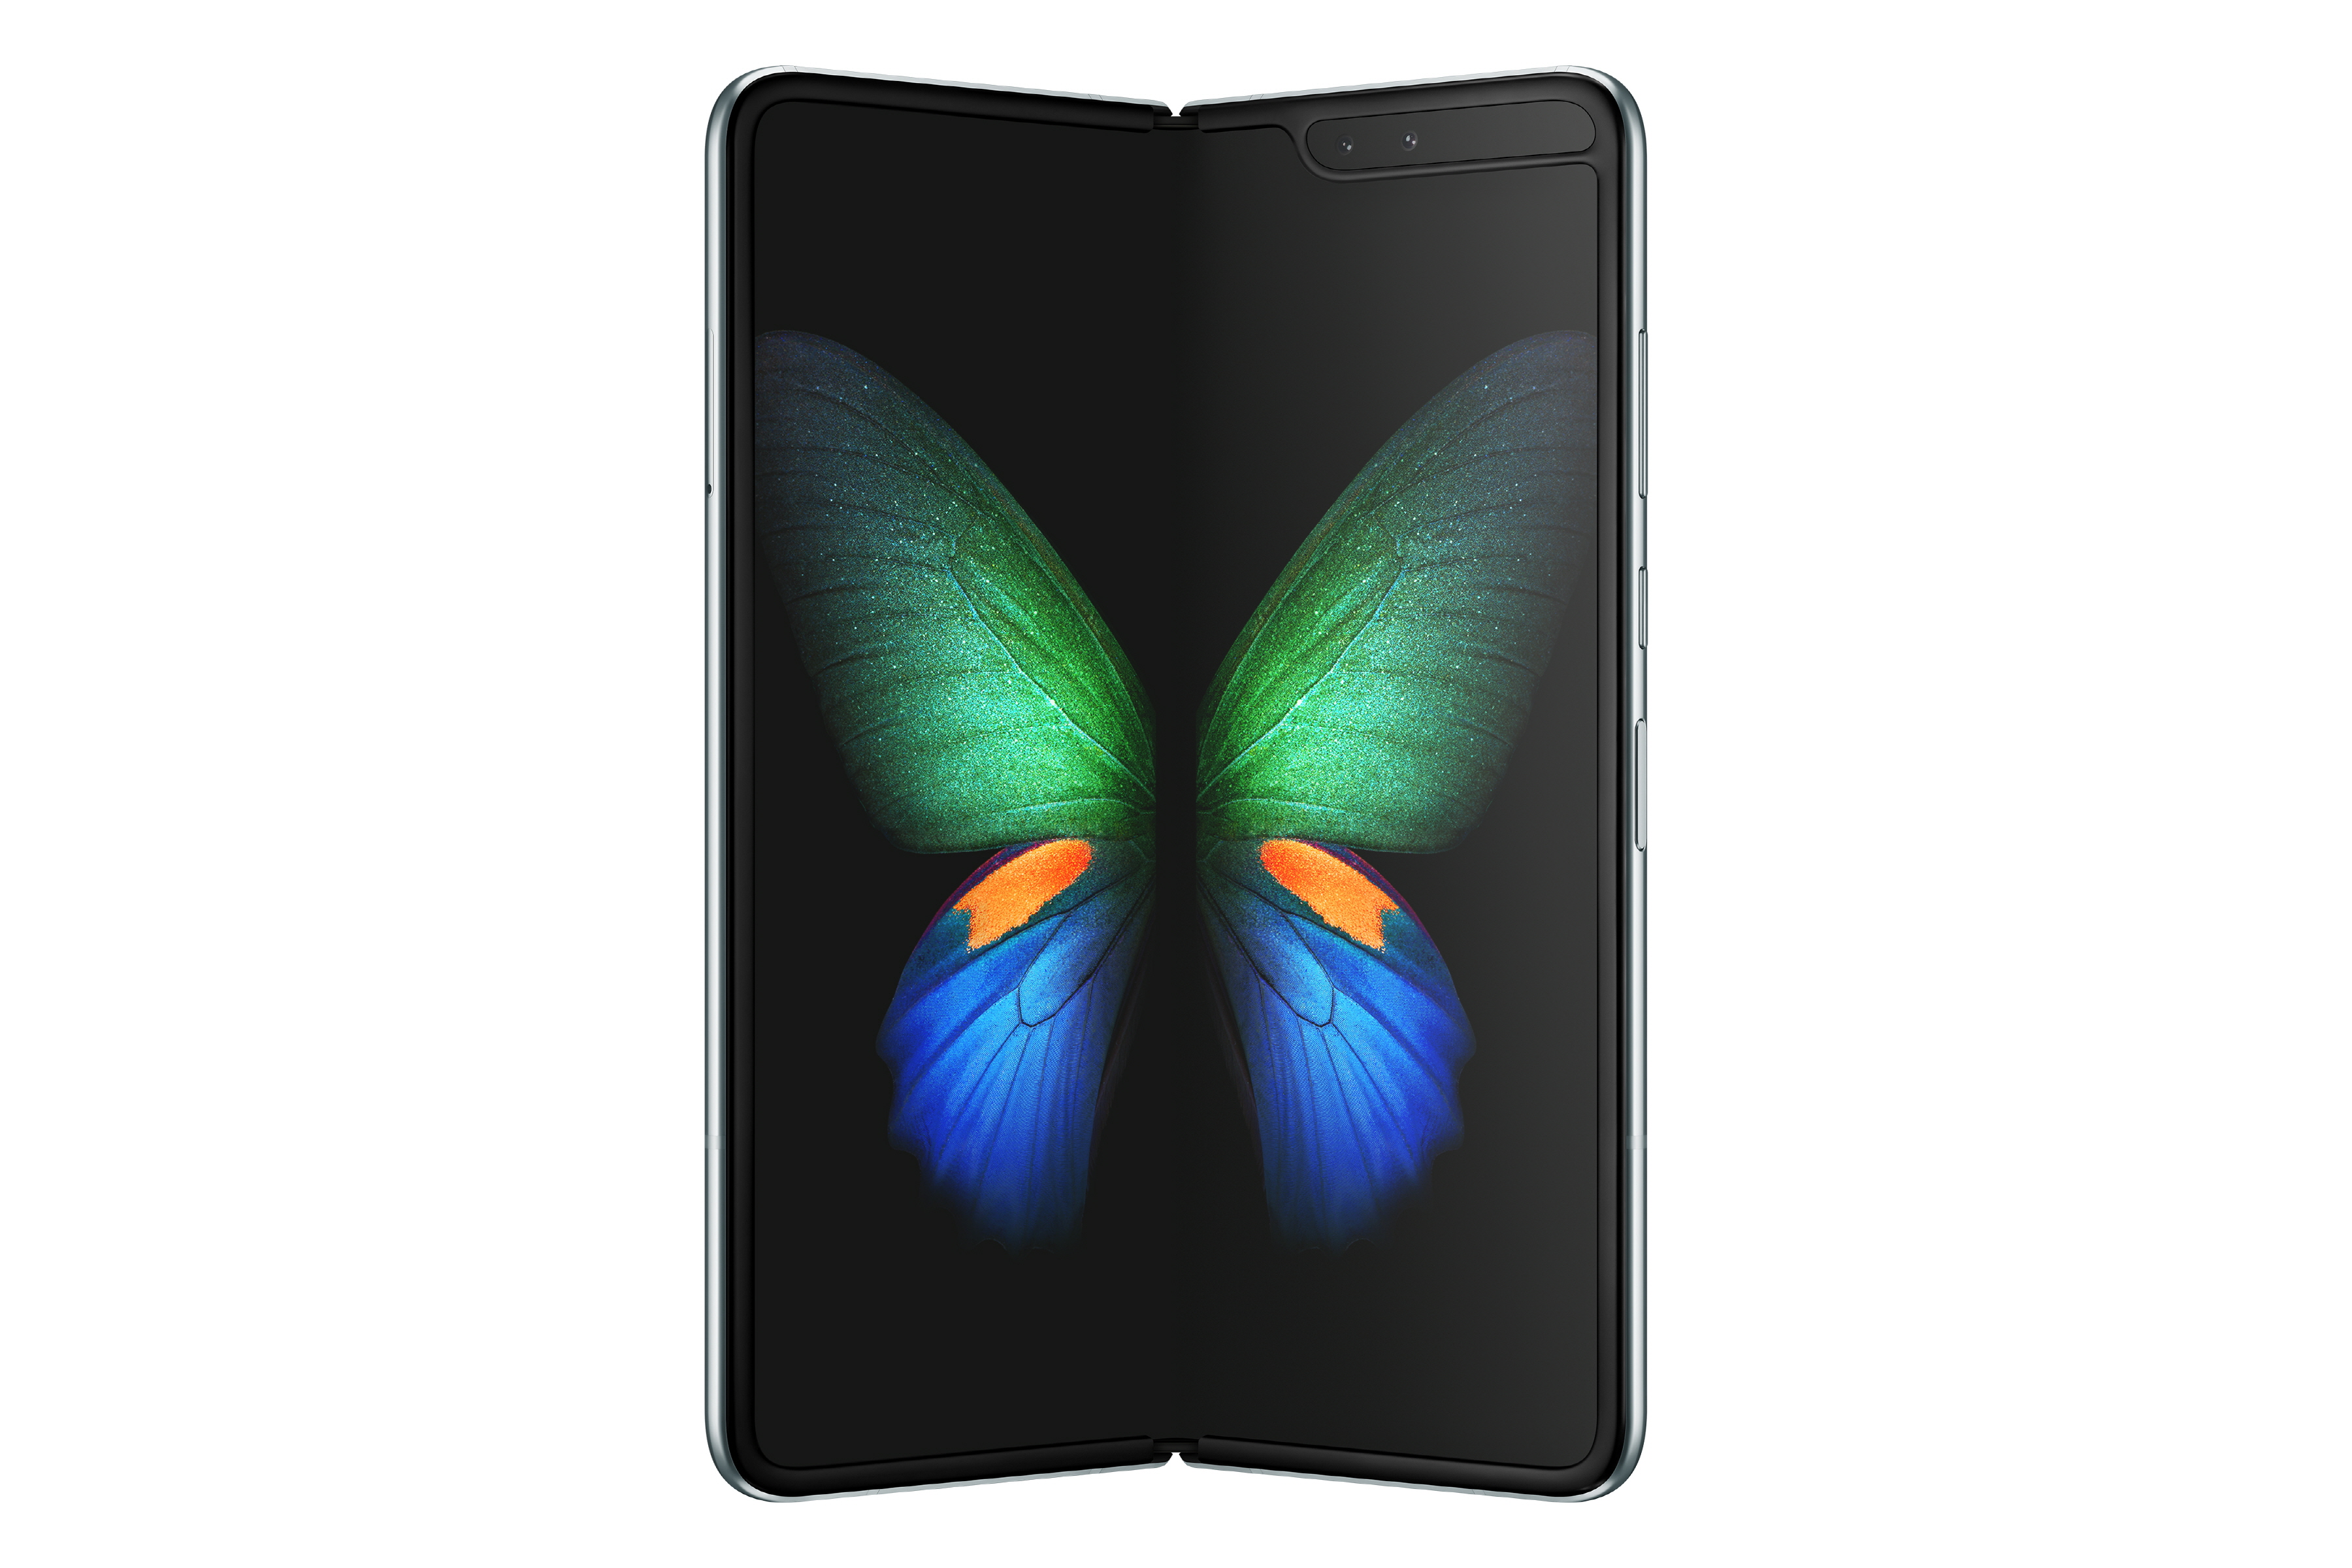 Samsung Galaxy Fold might be re-launched in July